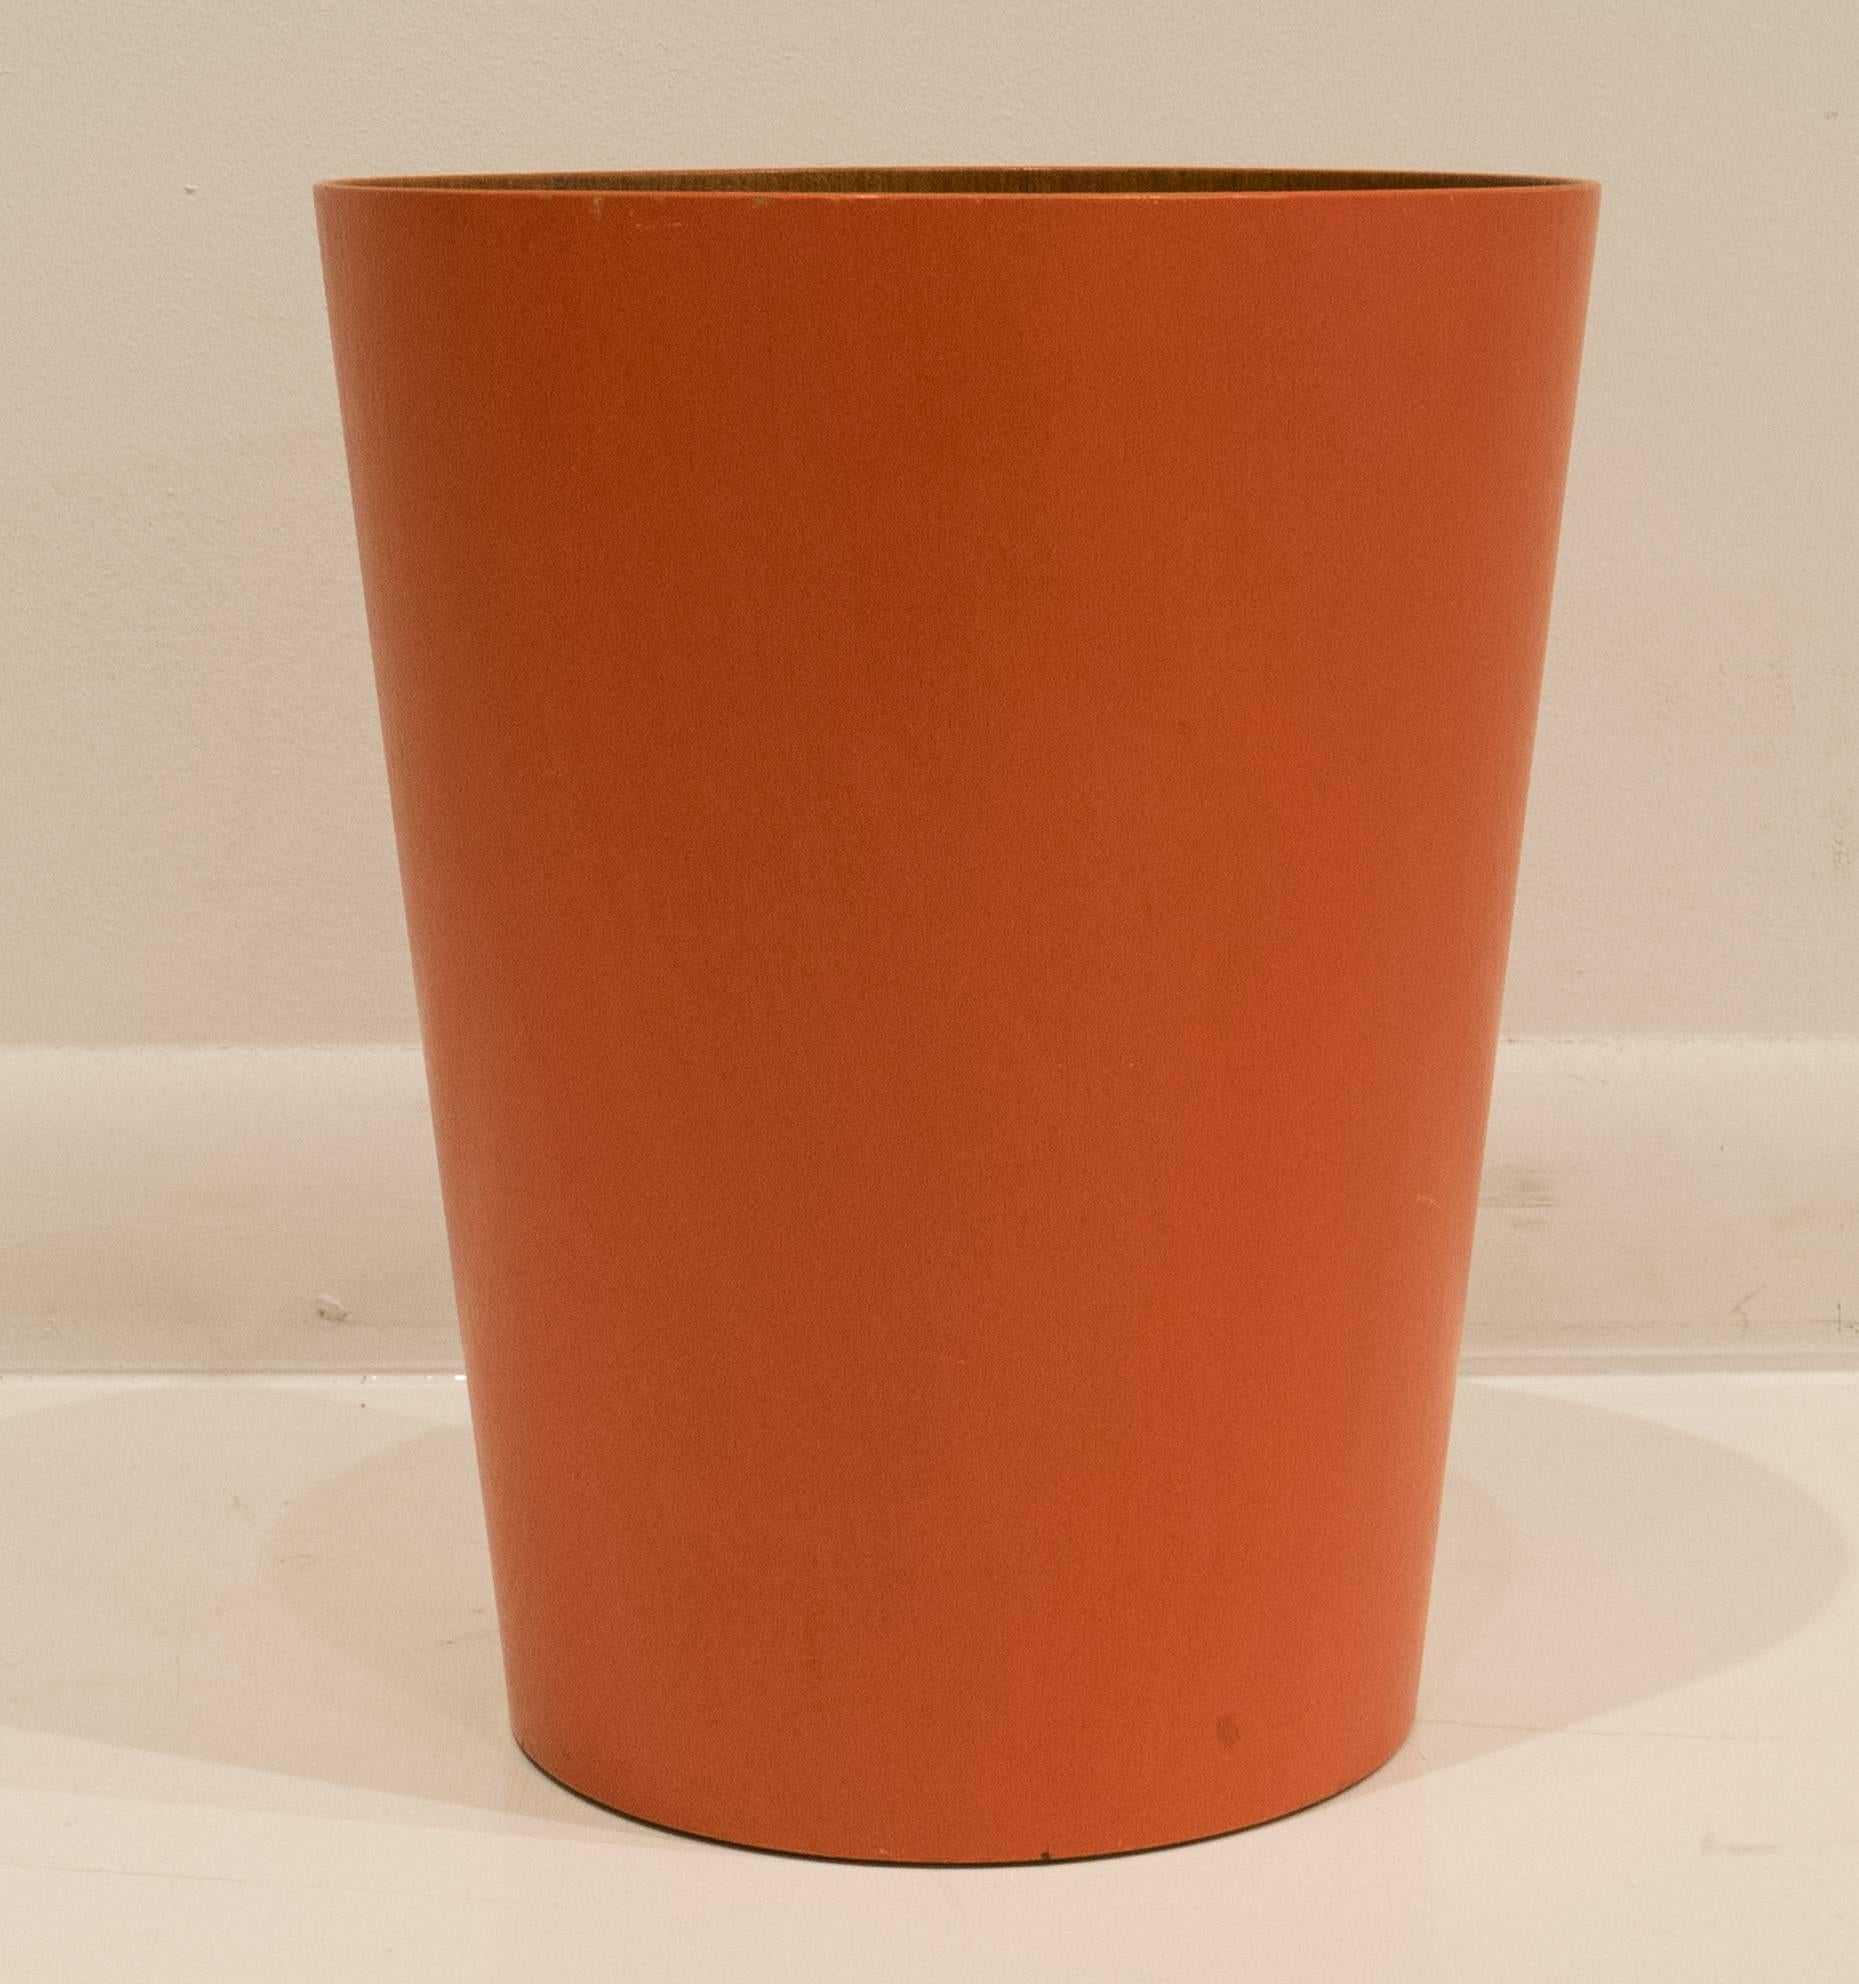 Wastebasket with teak interior and uncommon orange-lacquered beech exterior. Designed by Martin Aberg for Servex/International Designers Group, Sweden, circa 1960s.